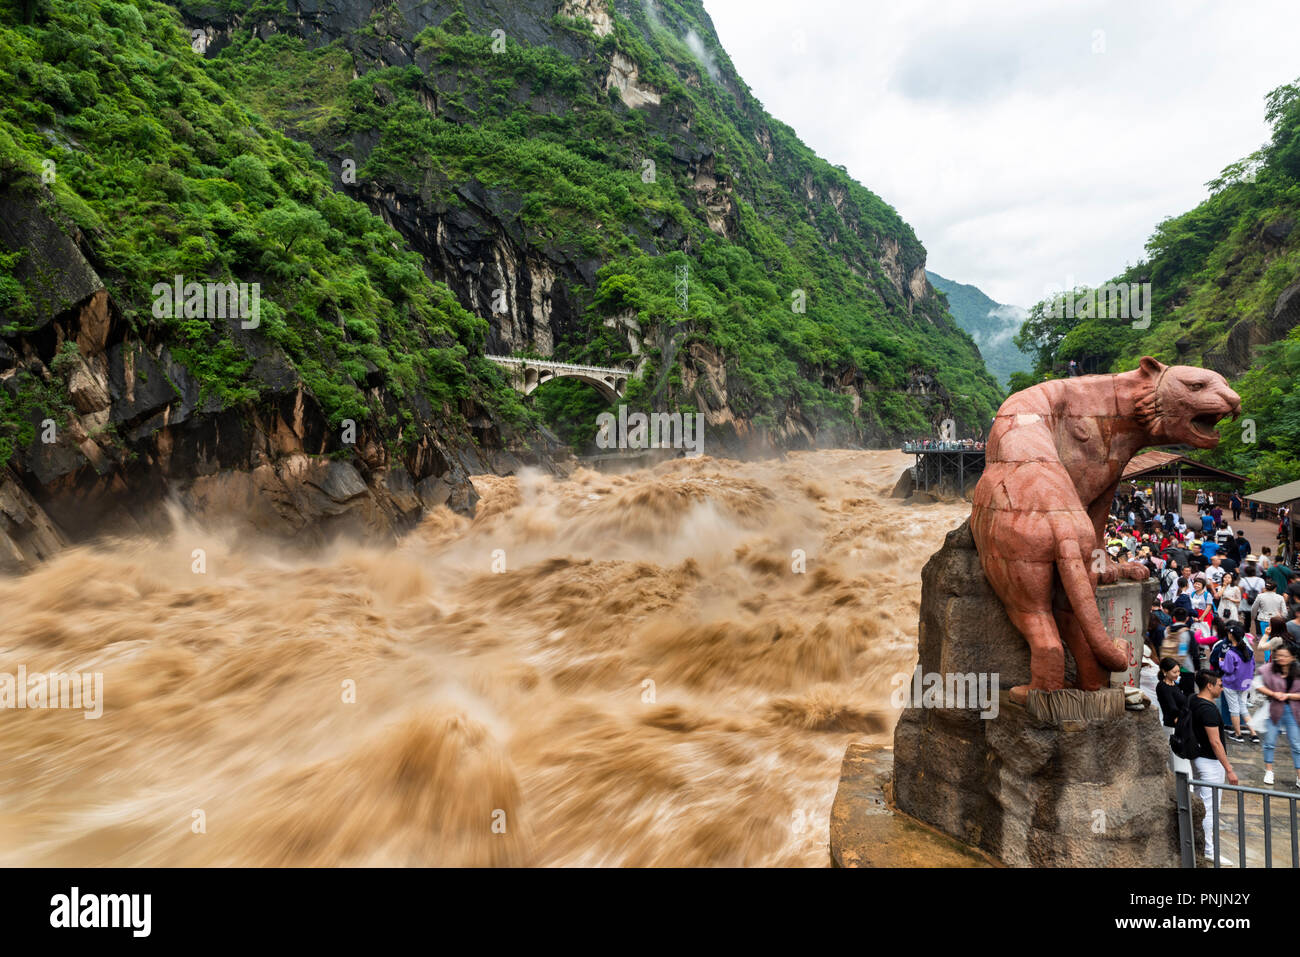 Tiger Leaping Gorge is a scenic gorge on the Jinsha River, a primary tributary of the upper Yangtze River, near Lijiang,Yunnan,China. Stock Photo